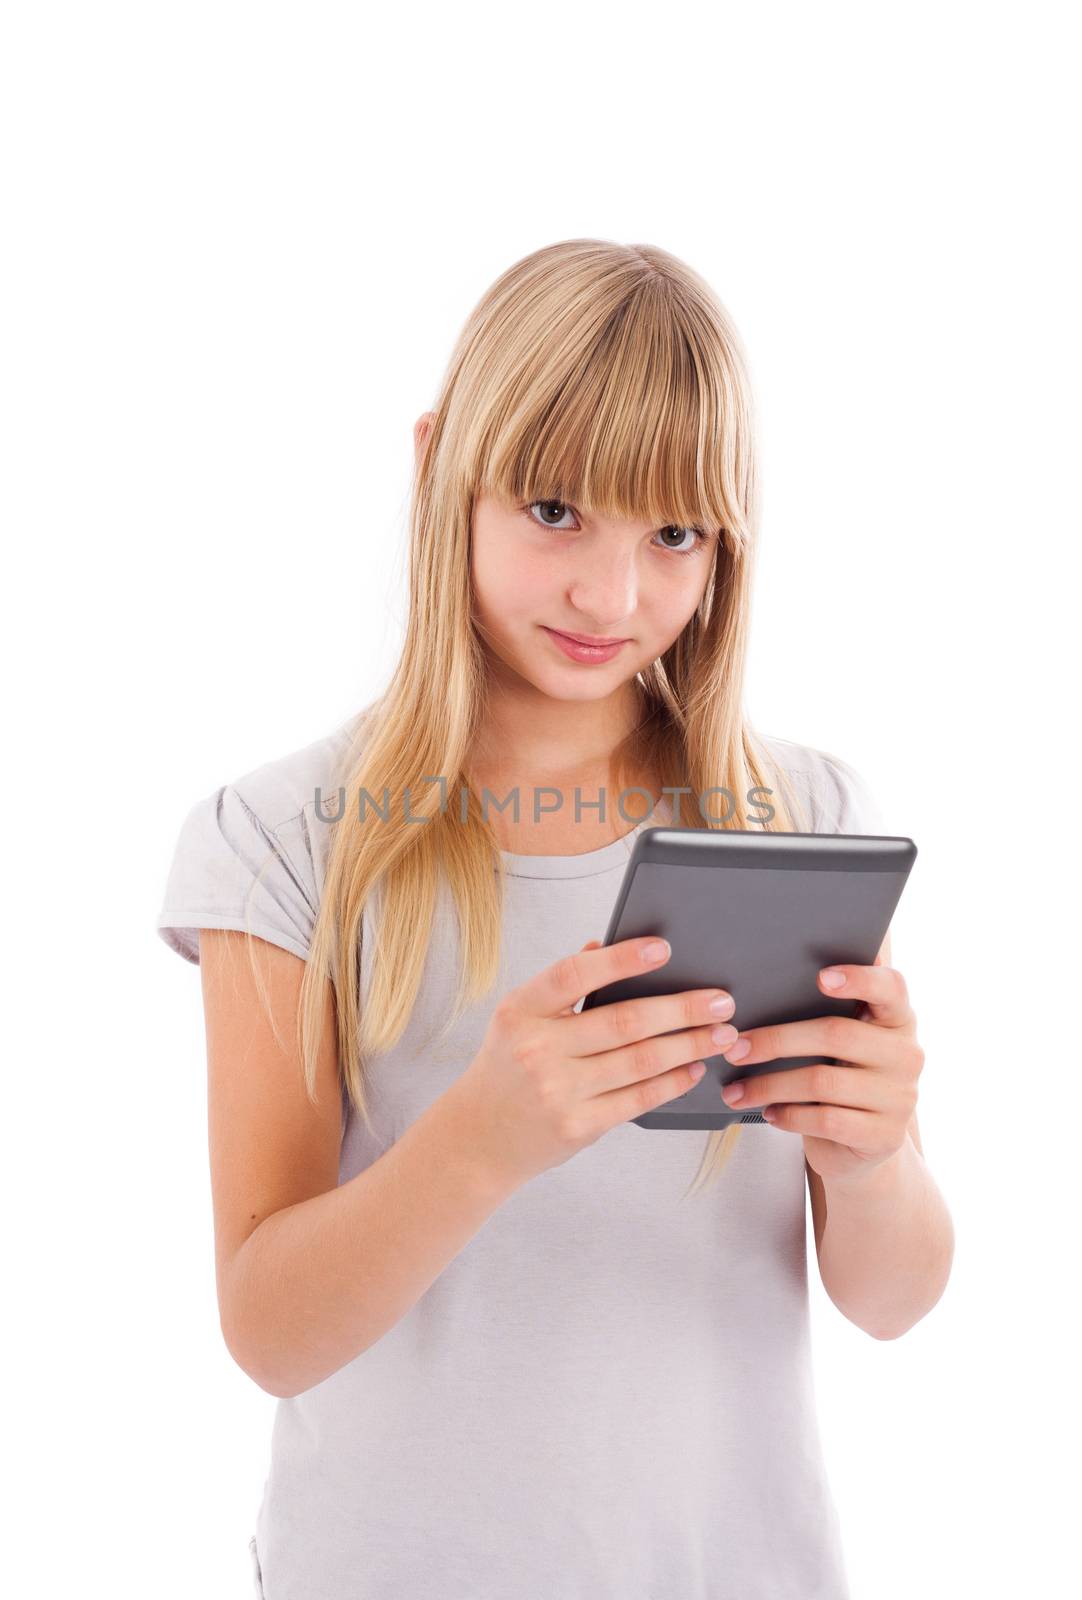 Young girl susing an ebook reader isolated on white